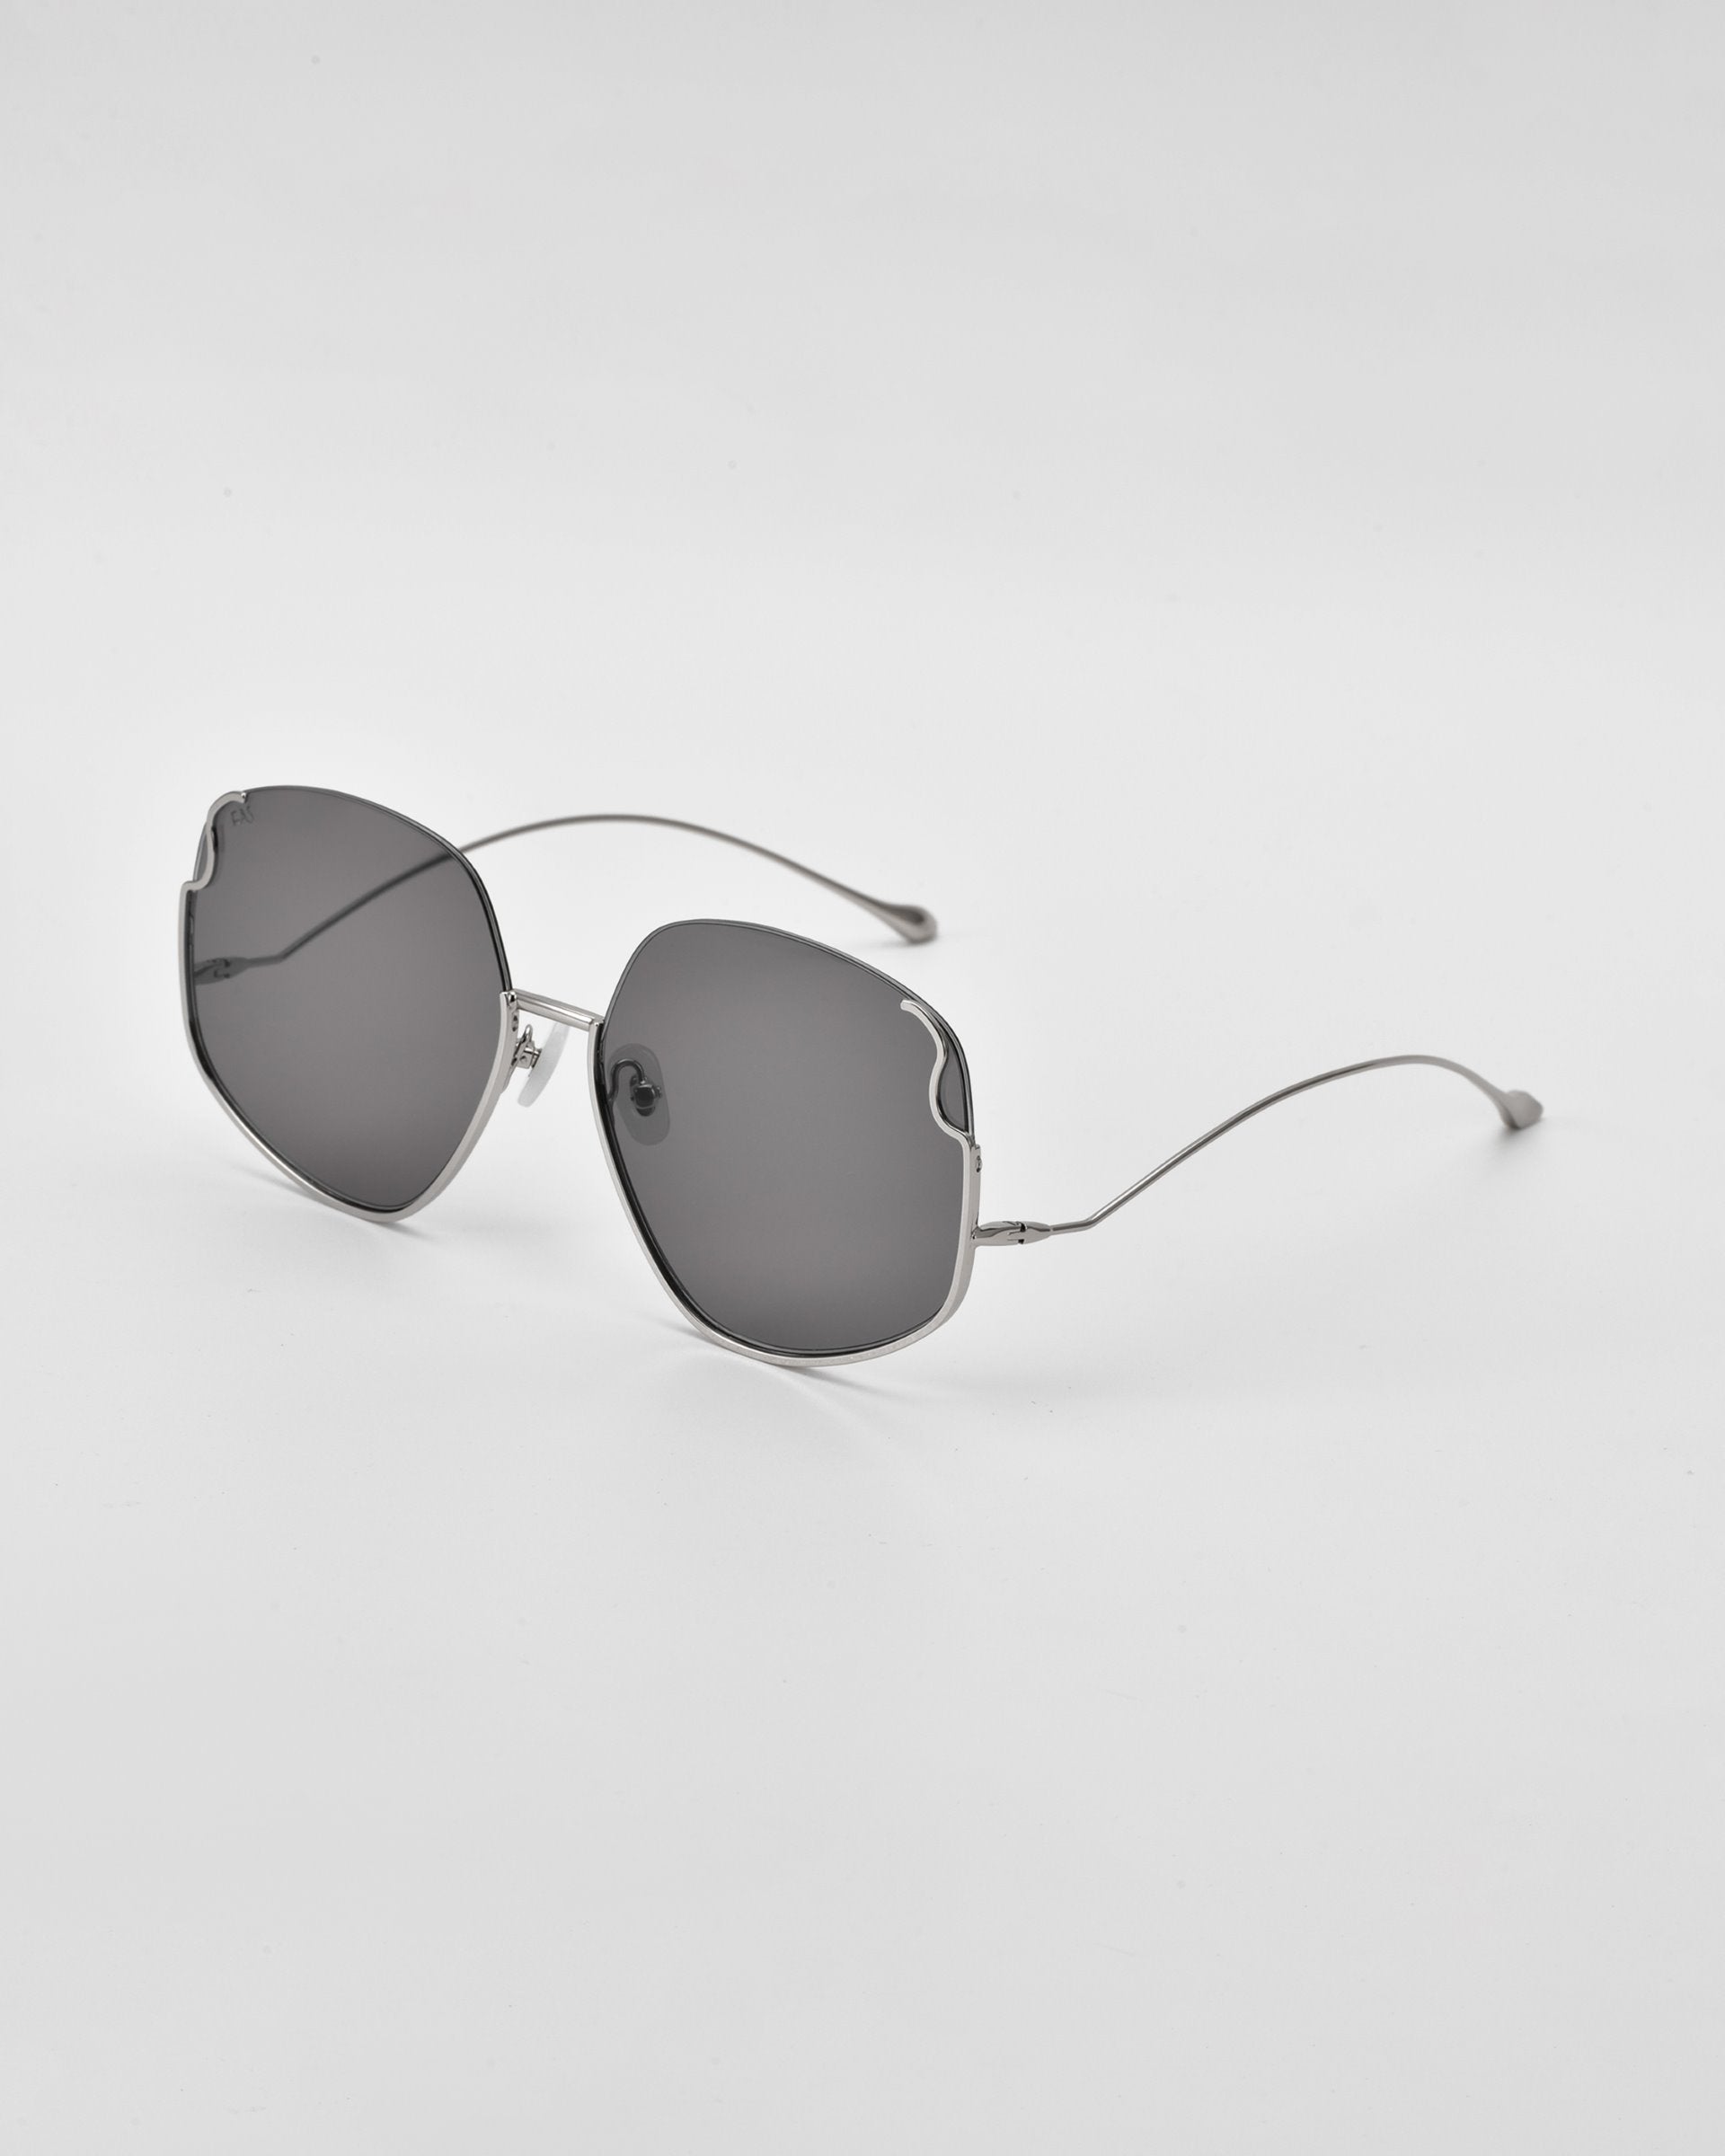 A pair of Drape sunglasses by For Art&#39;s Sake® with curved, wireframe arms and large, slightly rounded, dark lenses. The frames are fine and metallic with intricate metal detailing, creating a modern and minimalist look. The glasses are placed on a plain, light-colored surface.